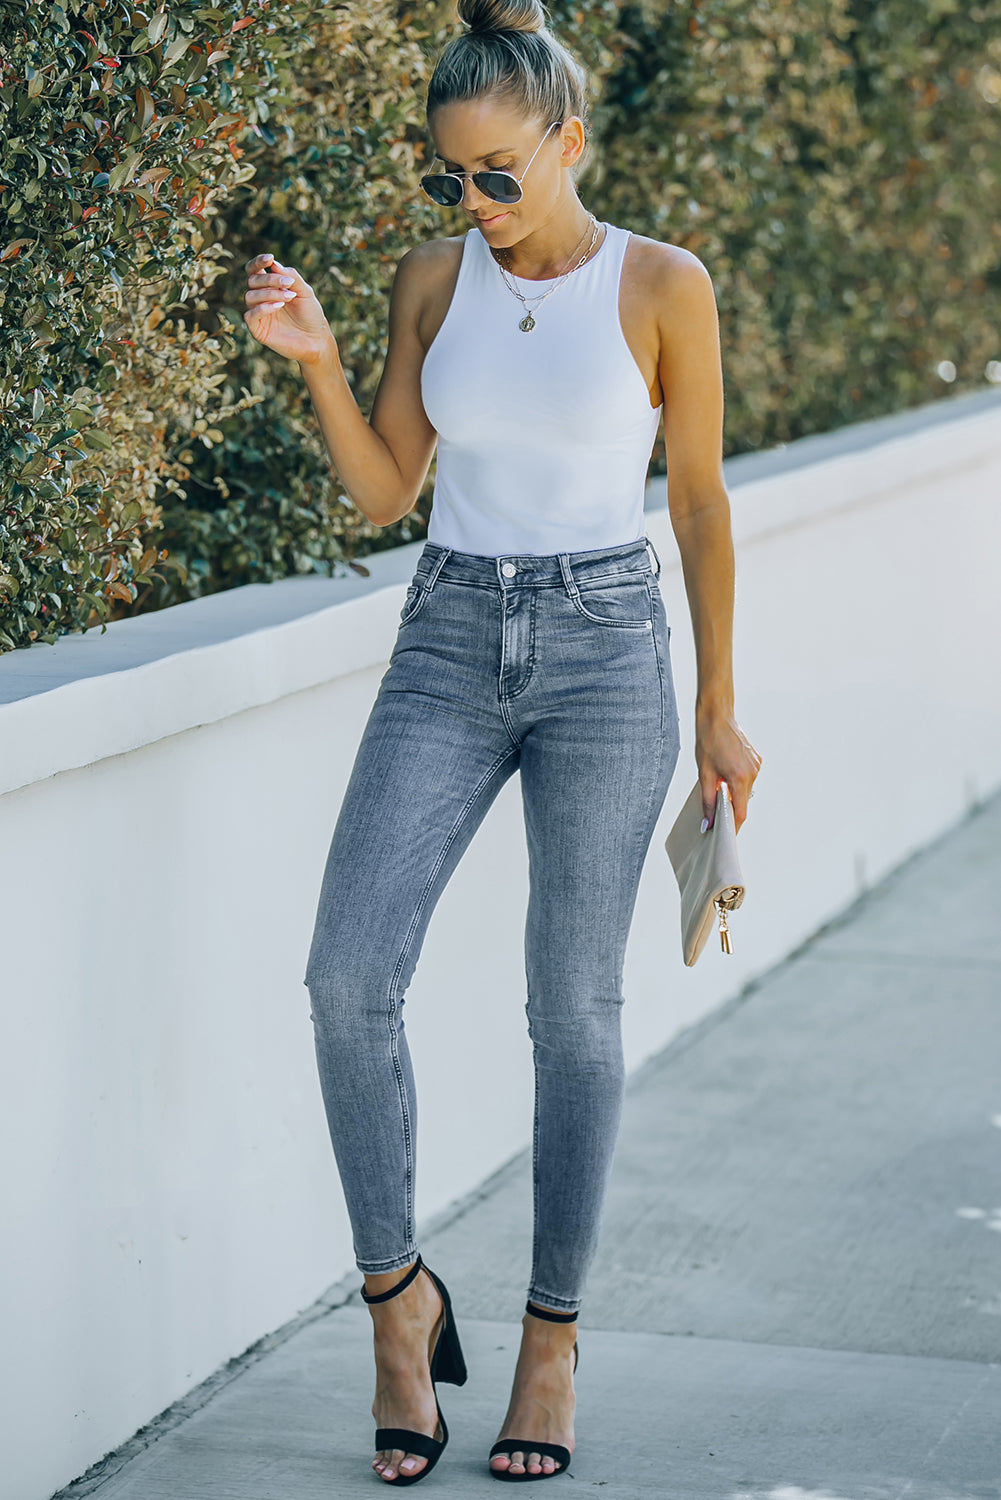 Buy Ankle-Length Skinny Jeans with Pockets by Faz